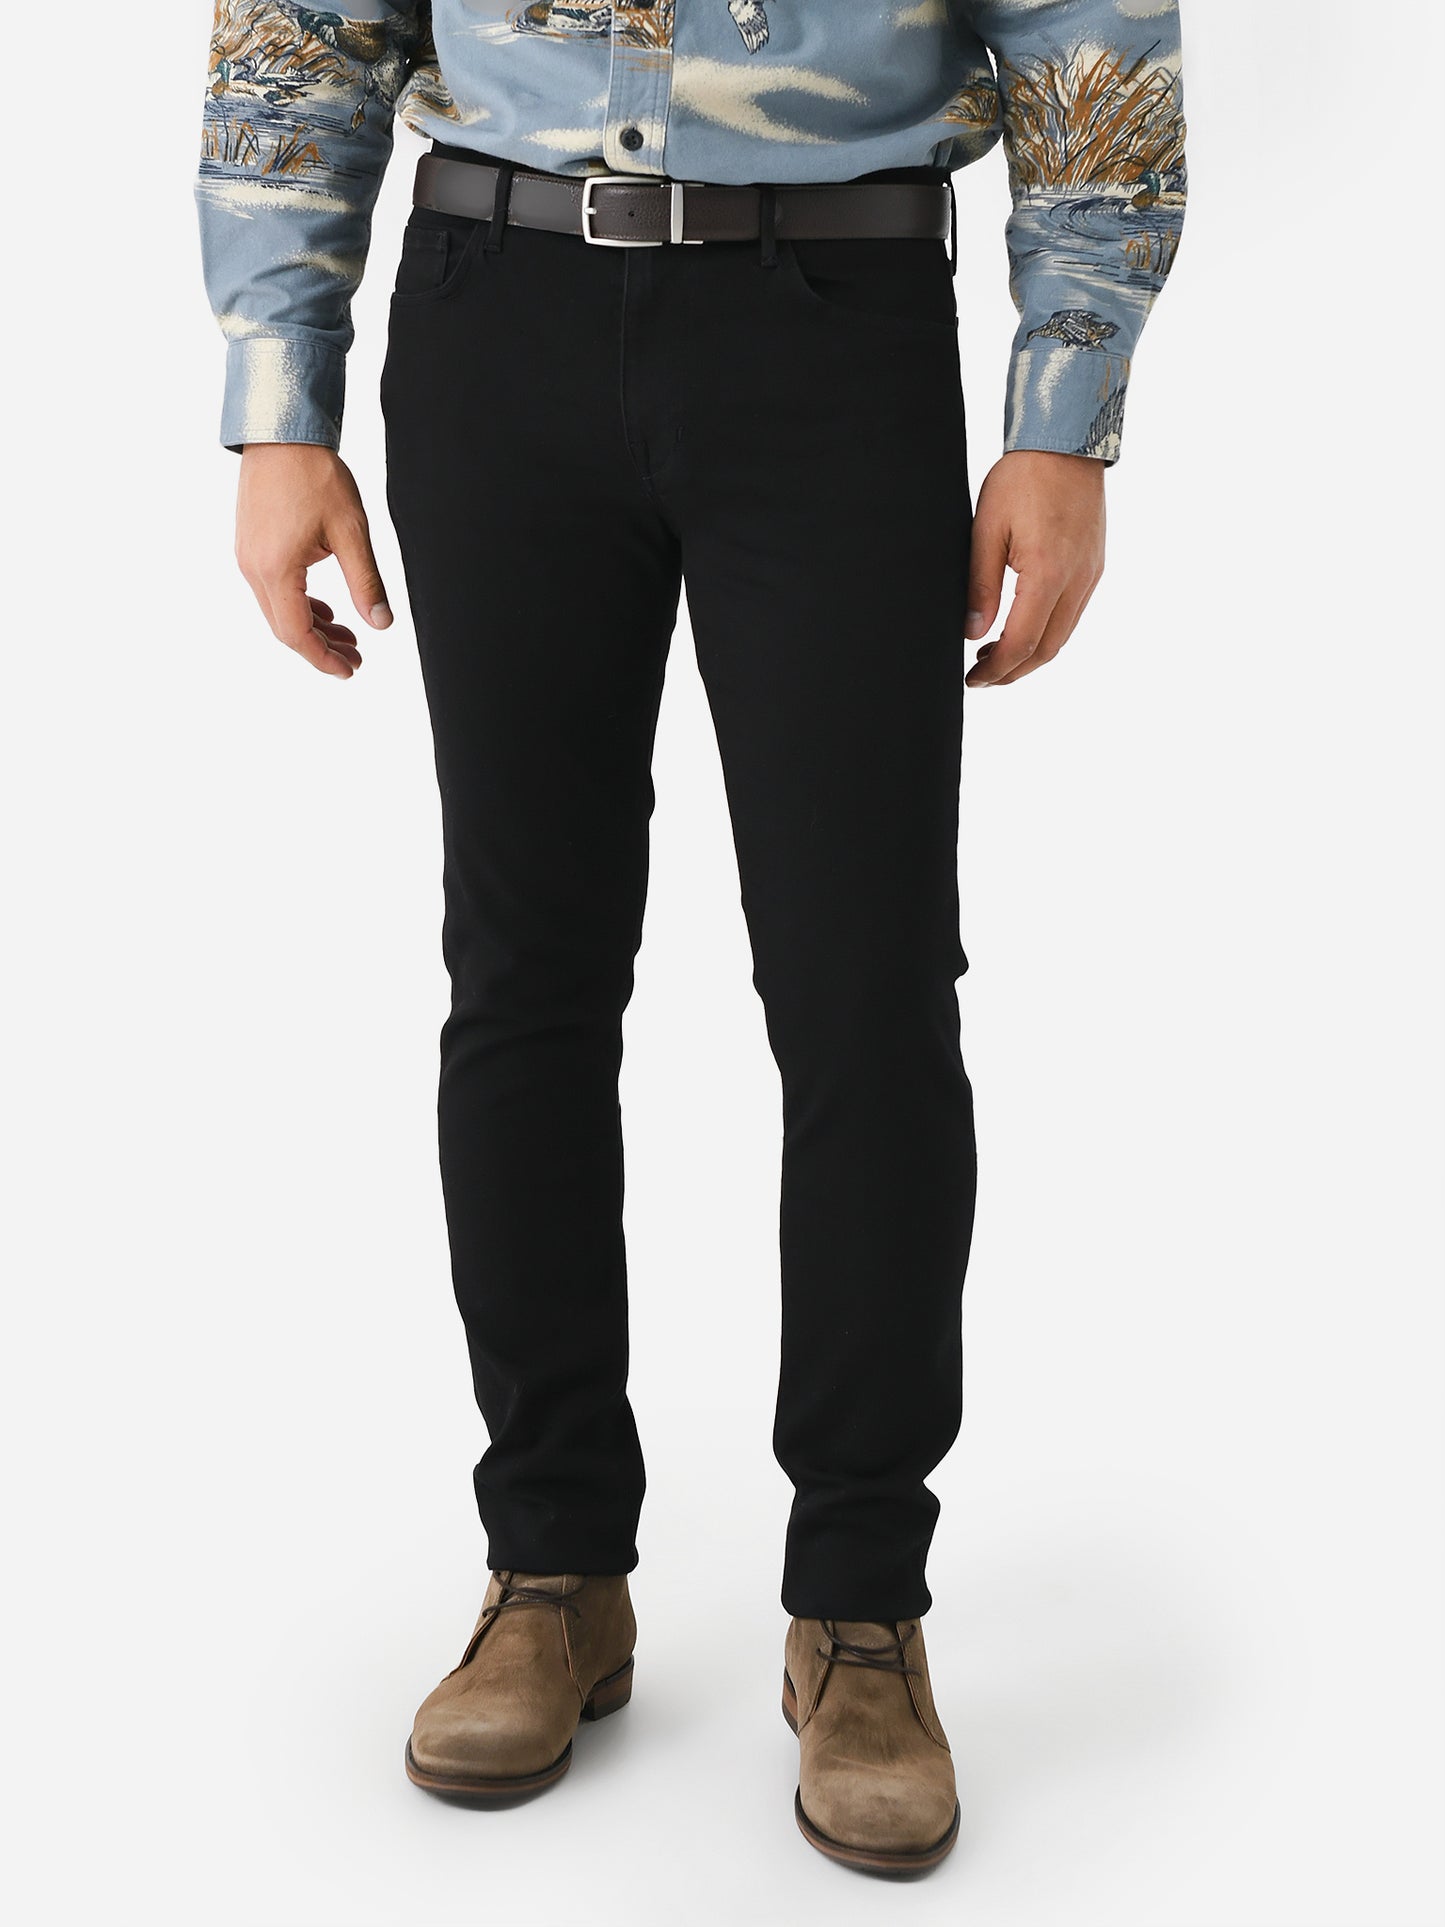 Joes Men's The Asher Jean